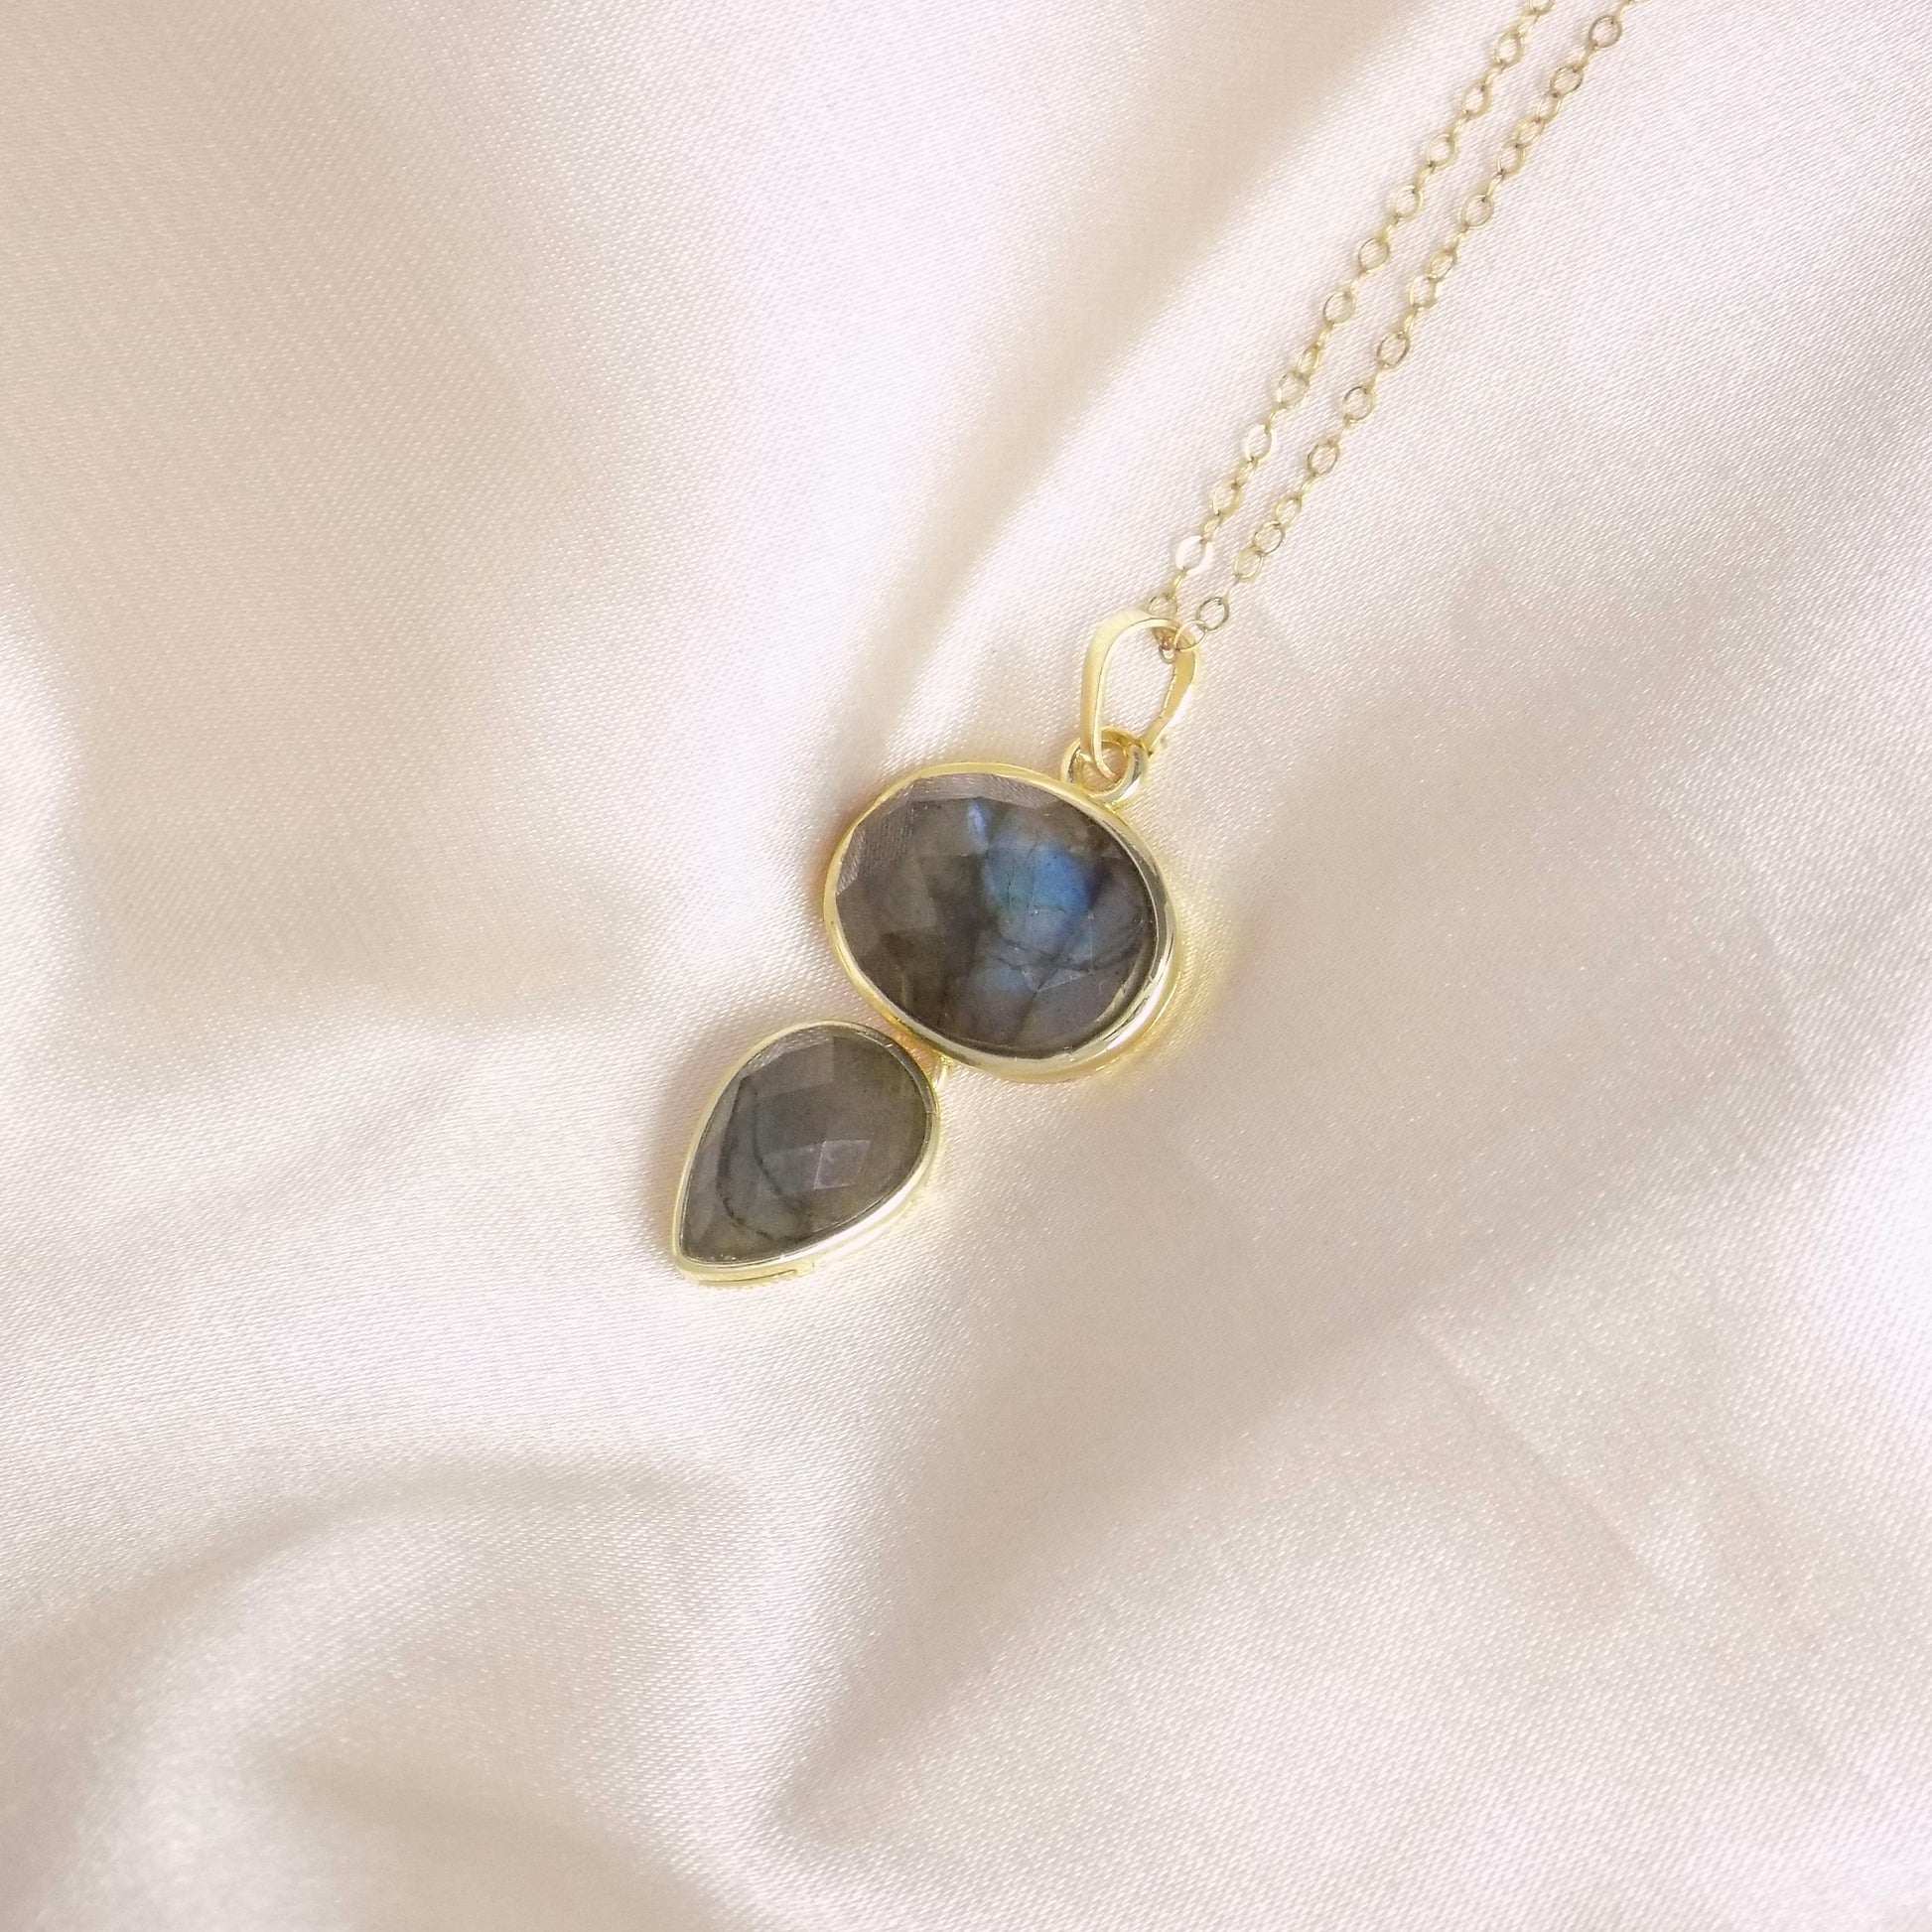 Labradorite Crystal Necklace with Blue Flash with 14K Gold Filled Chain, Christmas Gift For Mom, M7-67